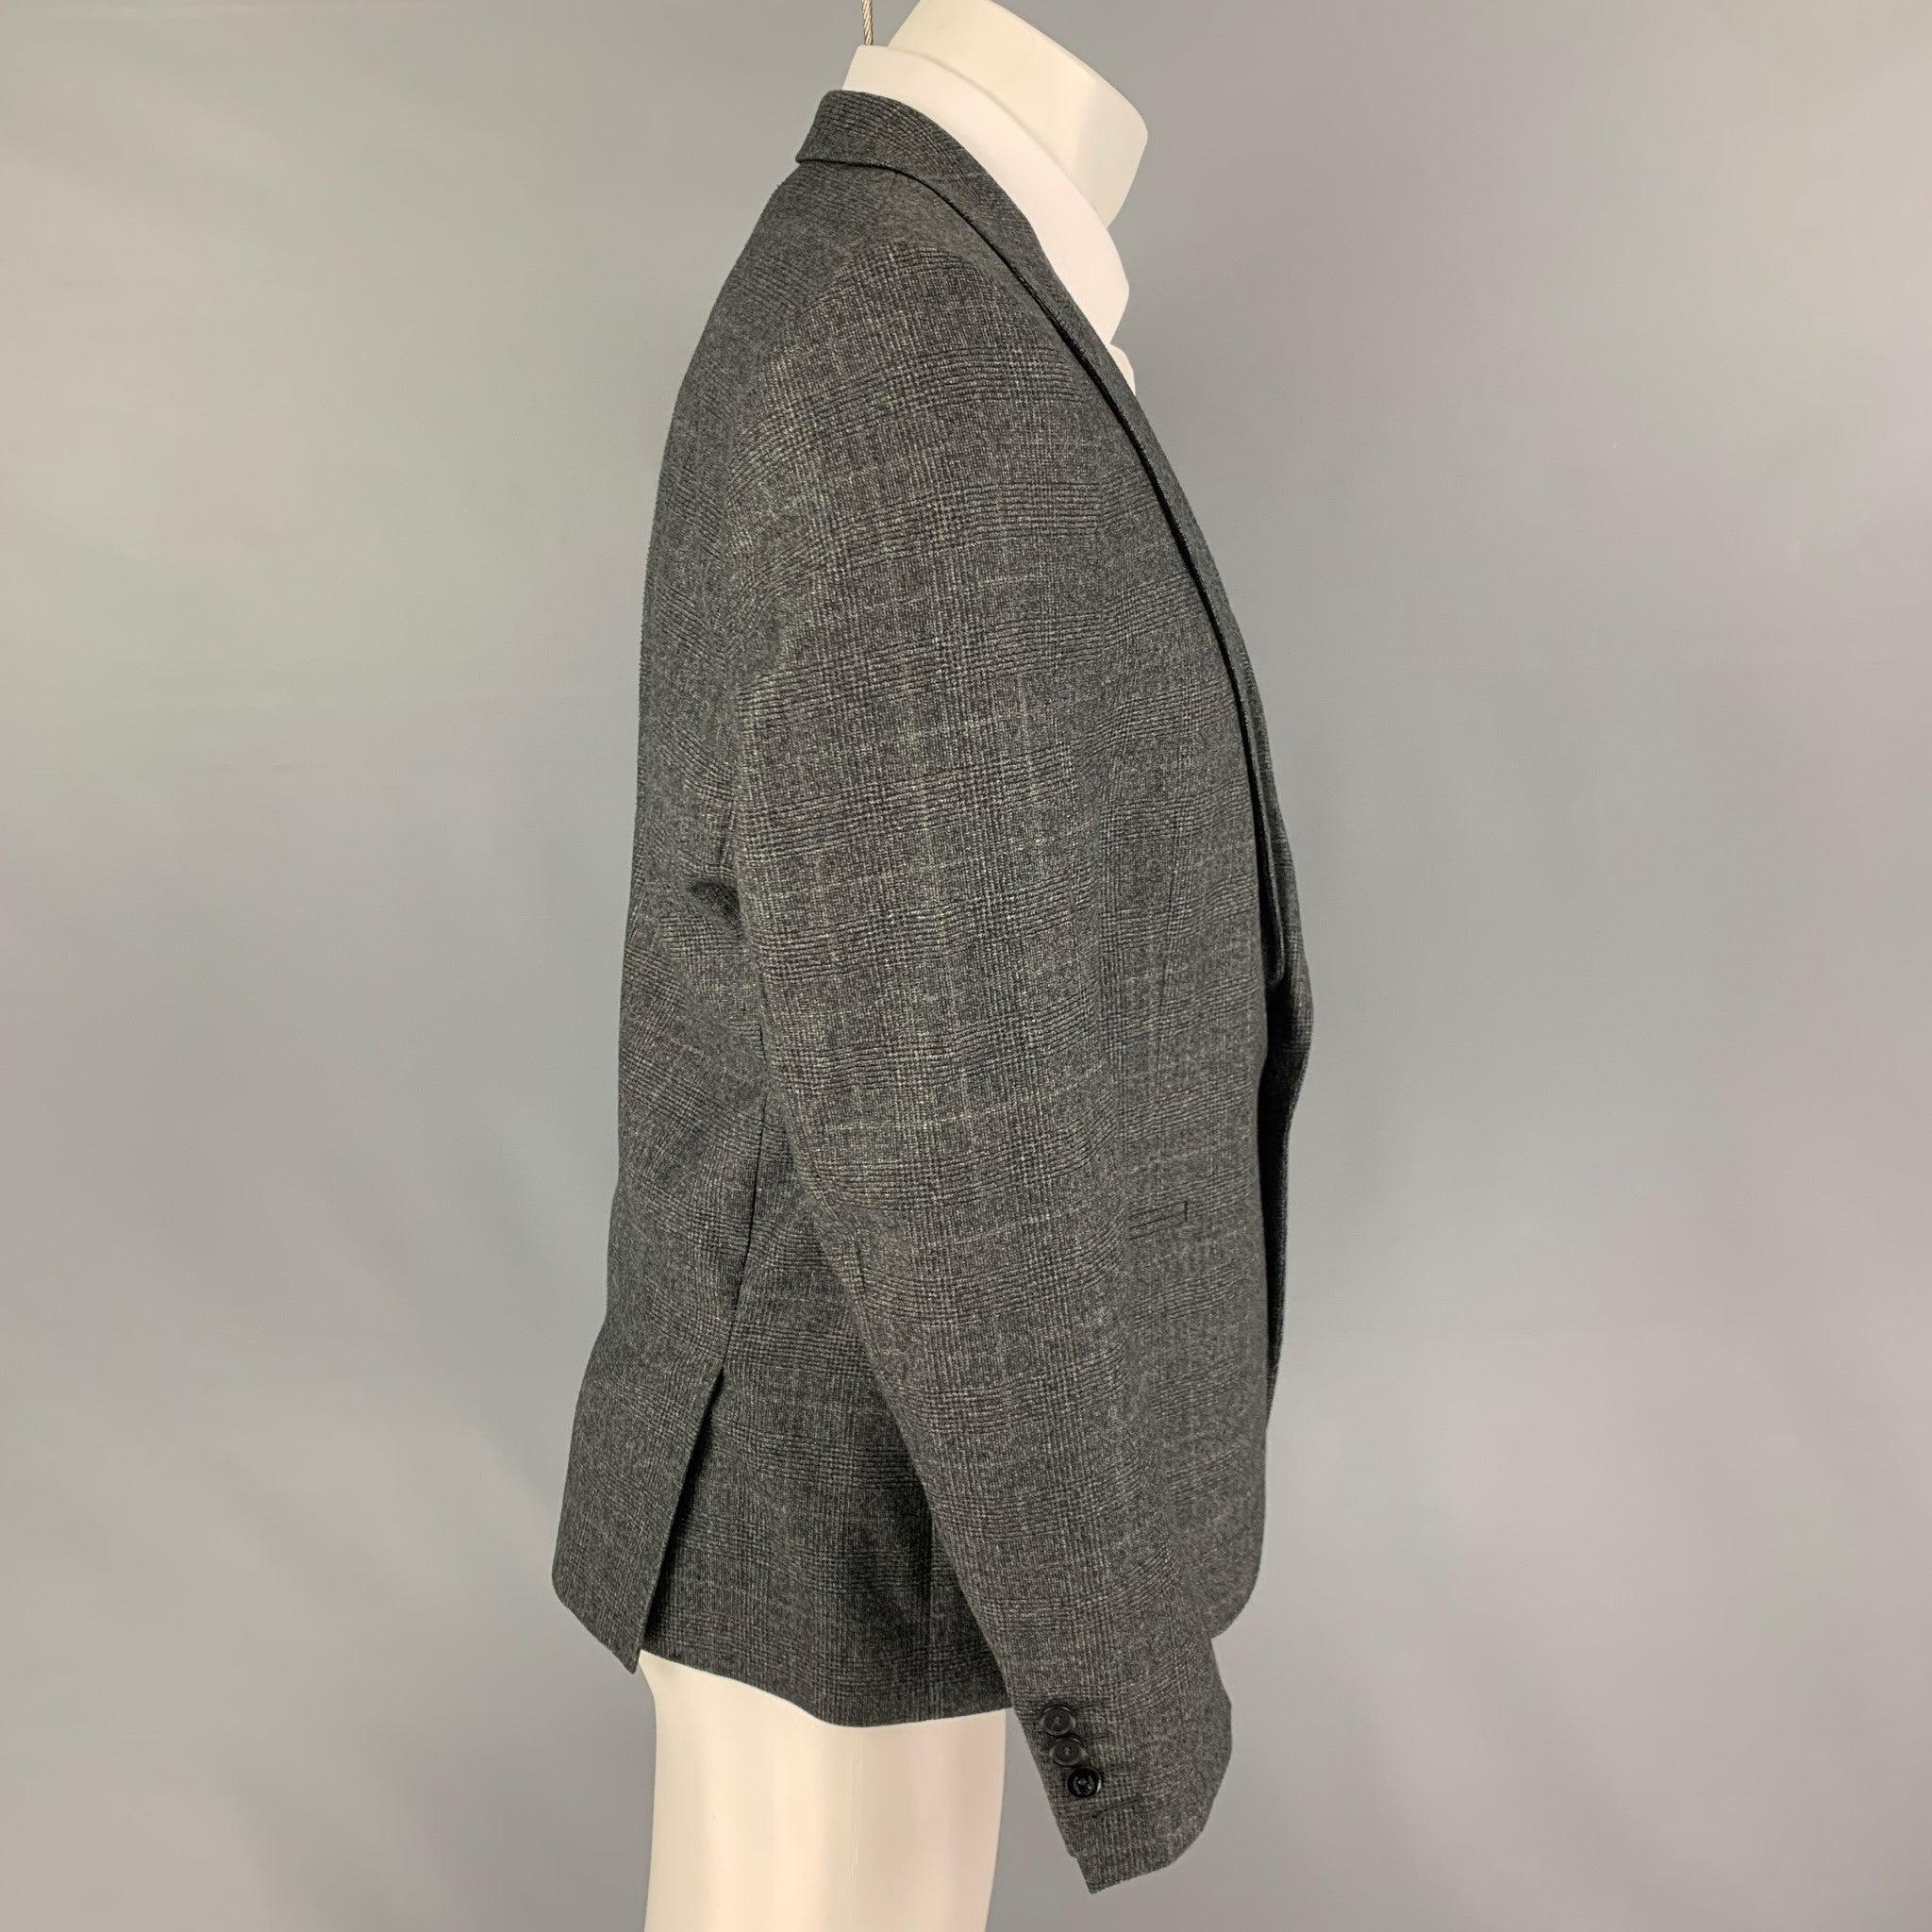 THE KOOPLES
sport coat comes in a dark gray glenplaid wool with a full liner featuring a peak lapel, slit pockets, double back vent, and a single button closure.Very Good Pre-Owned Condition. Small seam rip. As-is.  

Marked:   50 

Measurements: 
